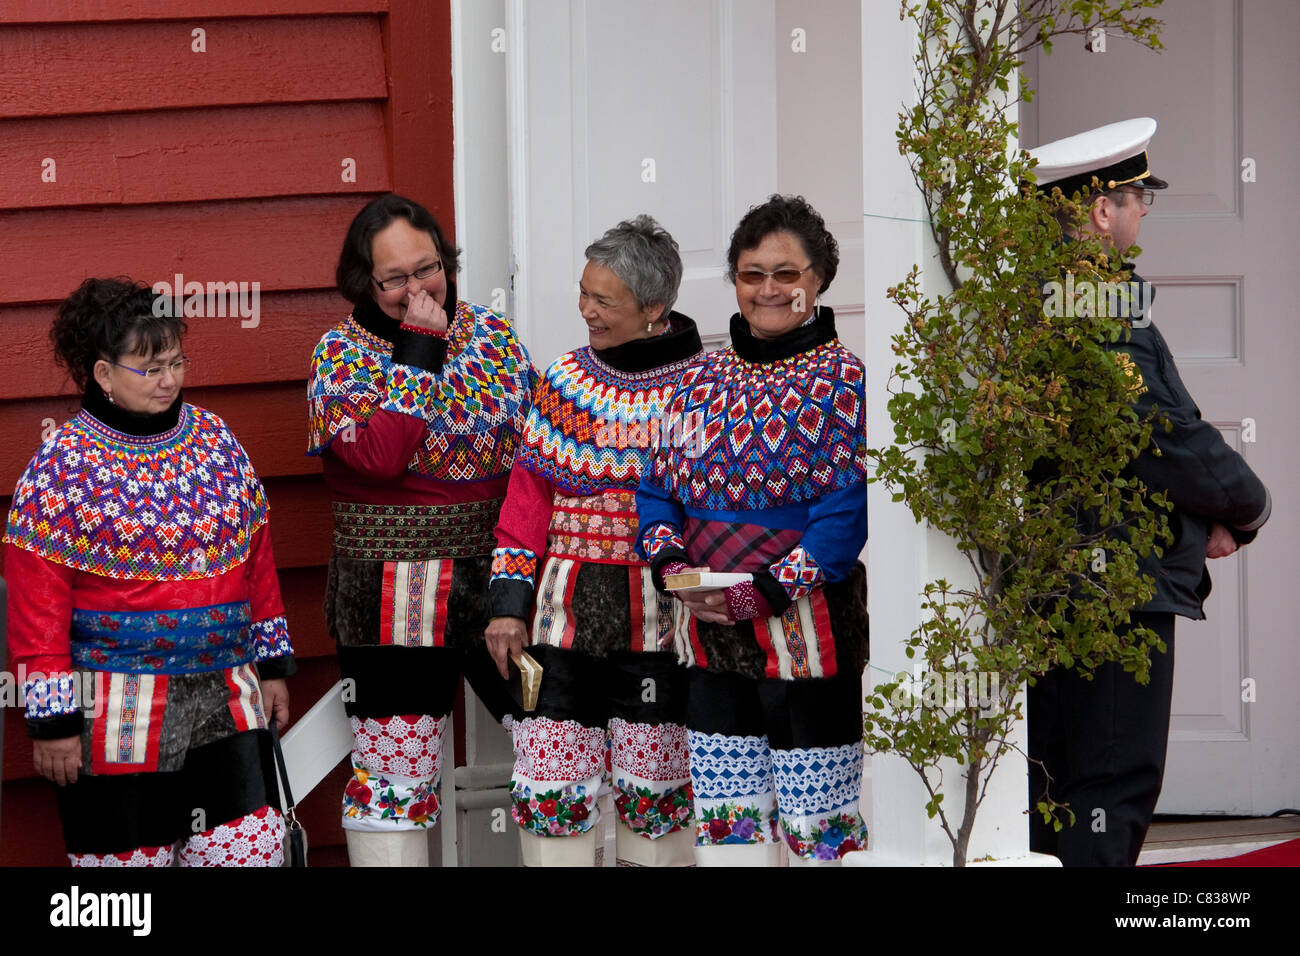 Inuit women sharing a giggle outside Cathedral Annaassisitta Oqaluffia, Nuuk on Greenland's National Day. Stock Photo